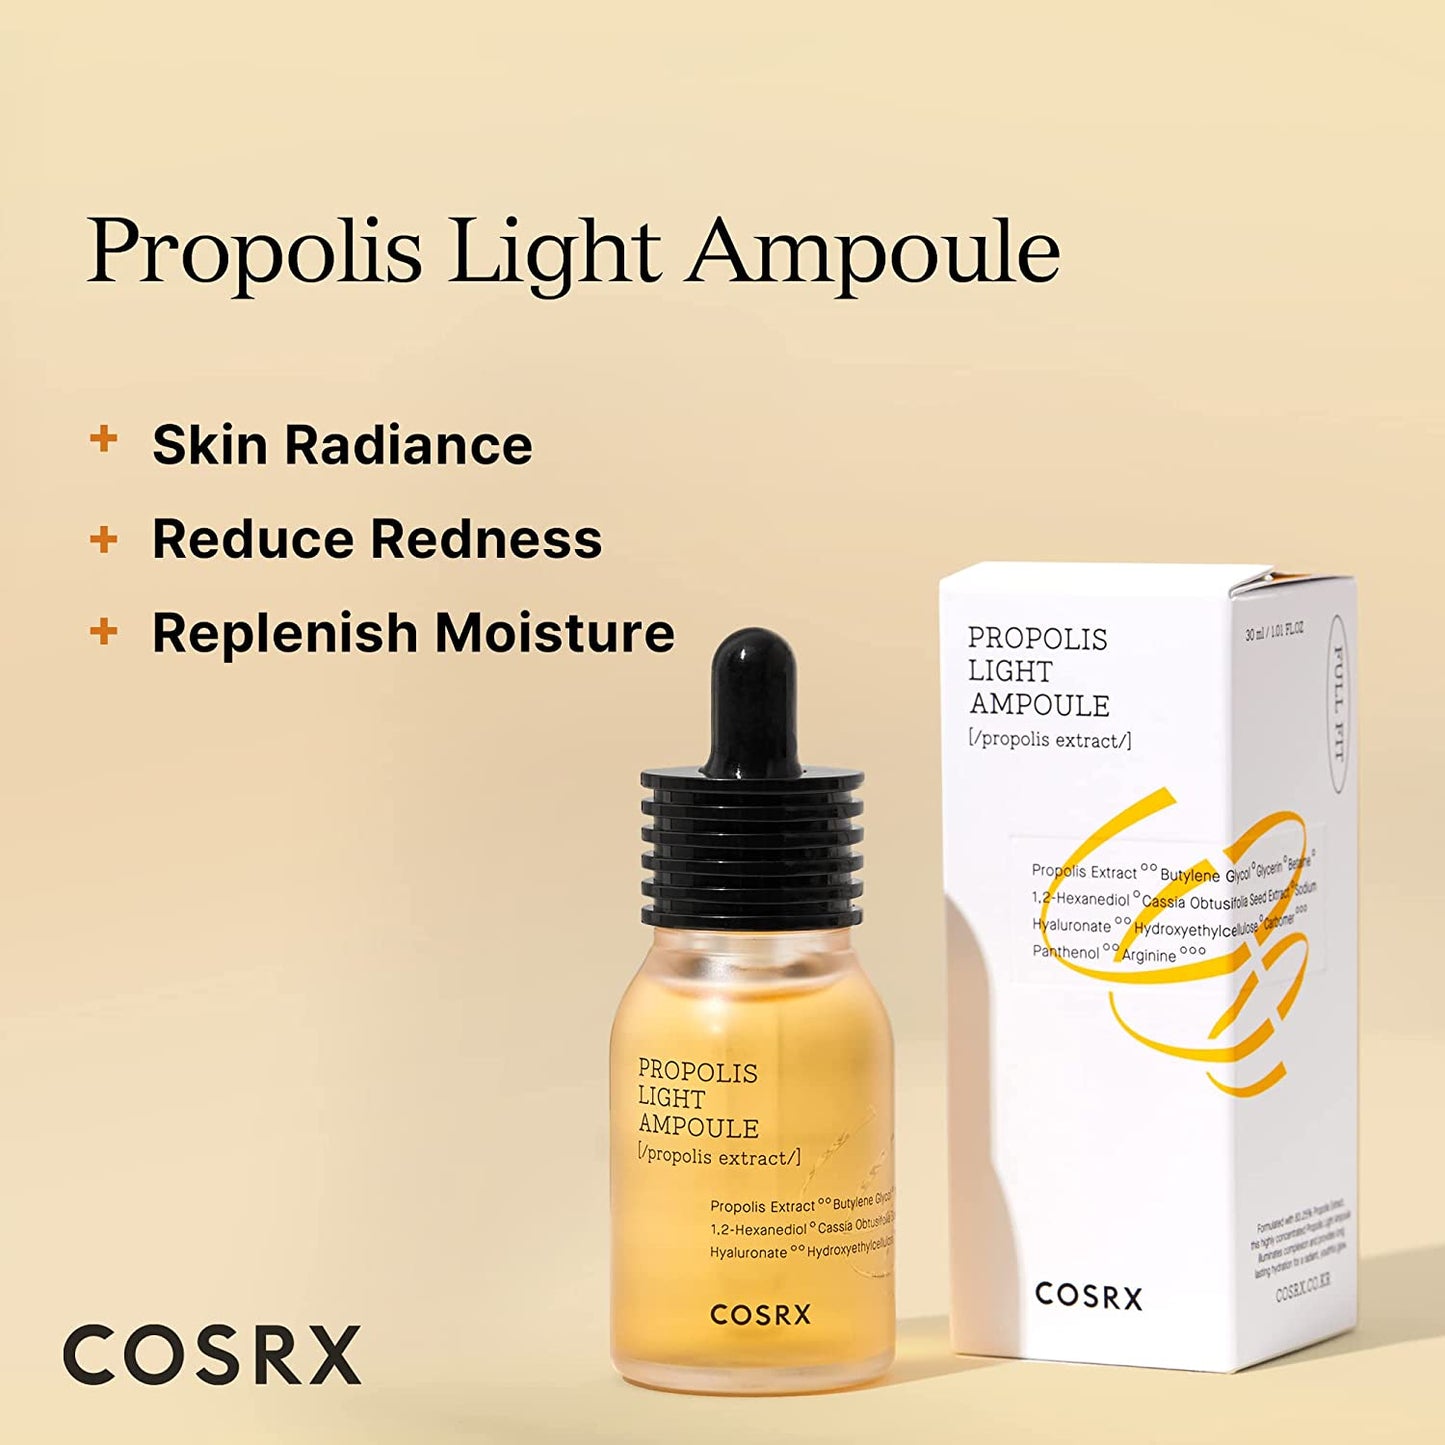 COSRX Propolis Ampoule, Glow Boosting Serum for Face with 73.5% Propolis Extract, 1.01 fl.oz / 30ml